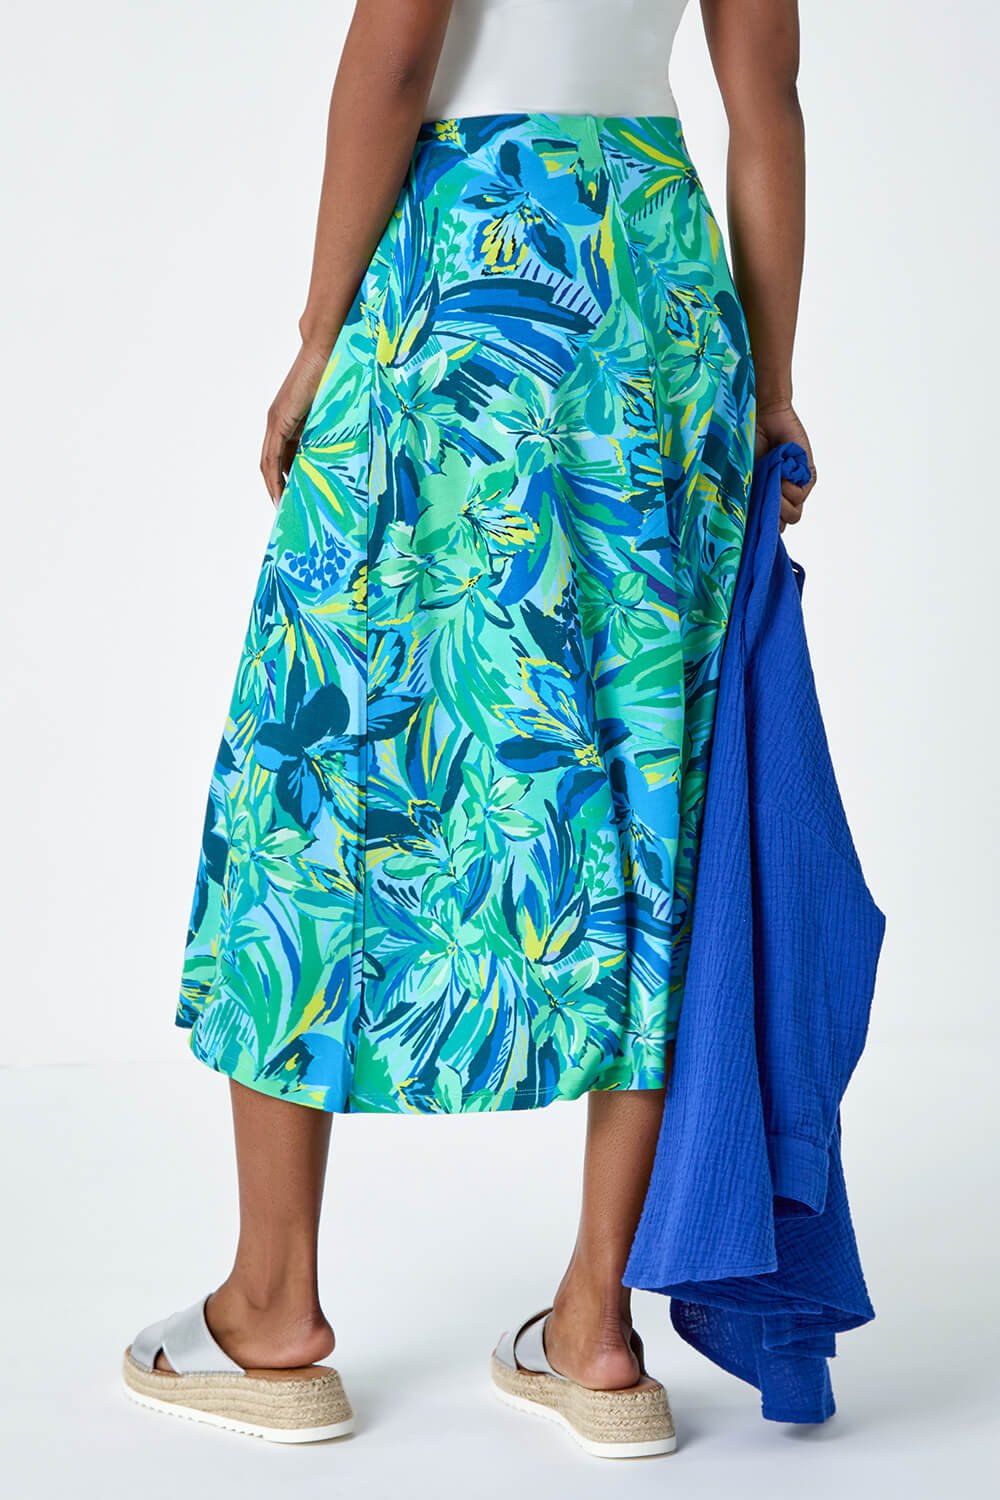 Green Tropical Floral Stretch Panel Skirt, Image 3 of 5